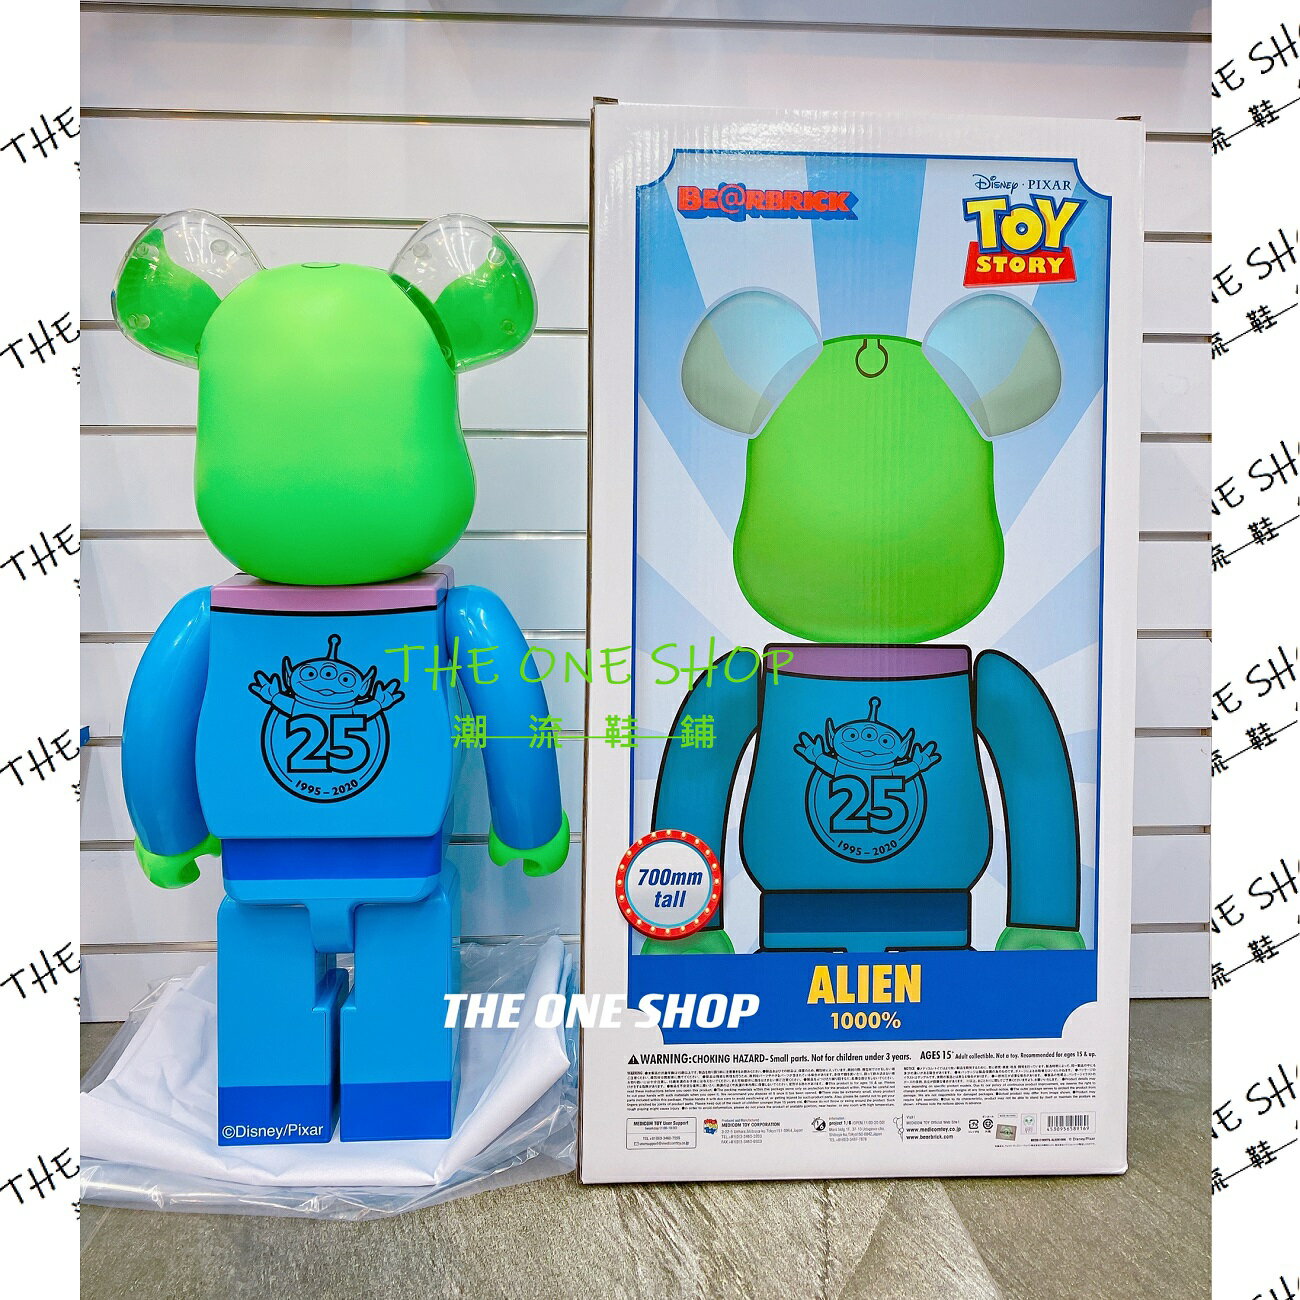 BE@RBRICK Alien TOY STORY Mickey Mouse 米奇米老鼠三眼怪熊公仔熊 